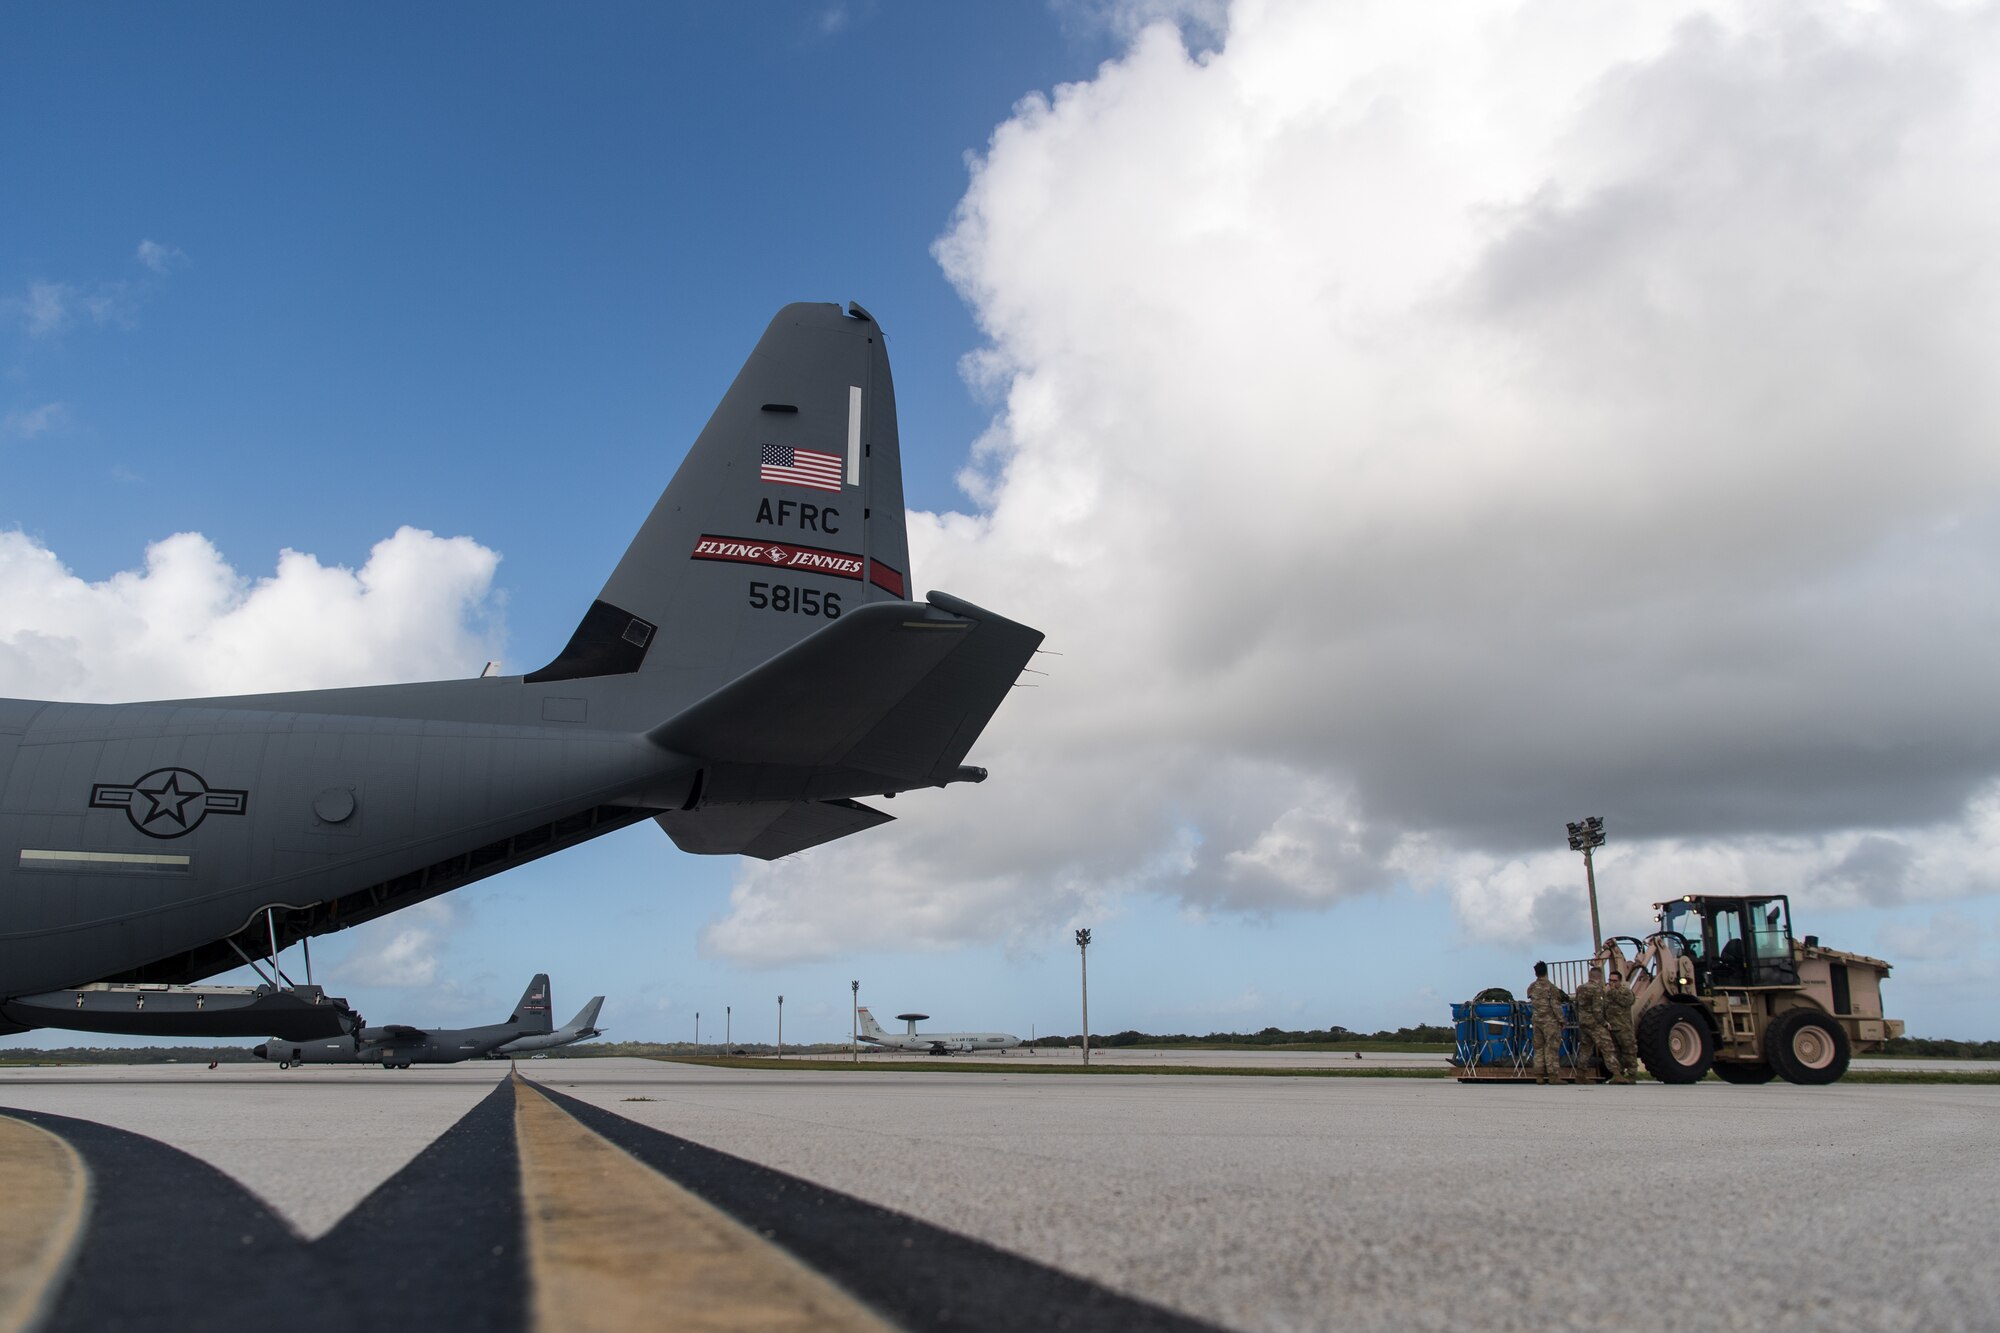 Airmen assigned to the 815th Airlift Squadron, Keesler Air Force Base, Mississippi, load container delivery systems onto a C-130J Hercules to be airdropped over Tinian during Exercise Cope North 20, Feb. 24, 2020, Andersen Air Force Base, Guam. Cope North 20 is an annual trilateral field training exercise conducted at Andersen Air Force Base, Guam, and around the Commonwealth of the Northern Mariana Islands (CNMI), Palau and Yap in the Federated States of Micronesia. (U.S. Air Force photo by Senior Airman Gracie Lee)